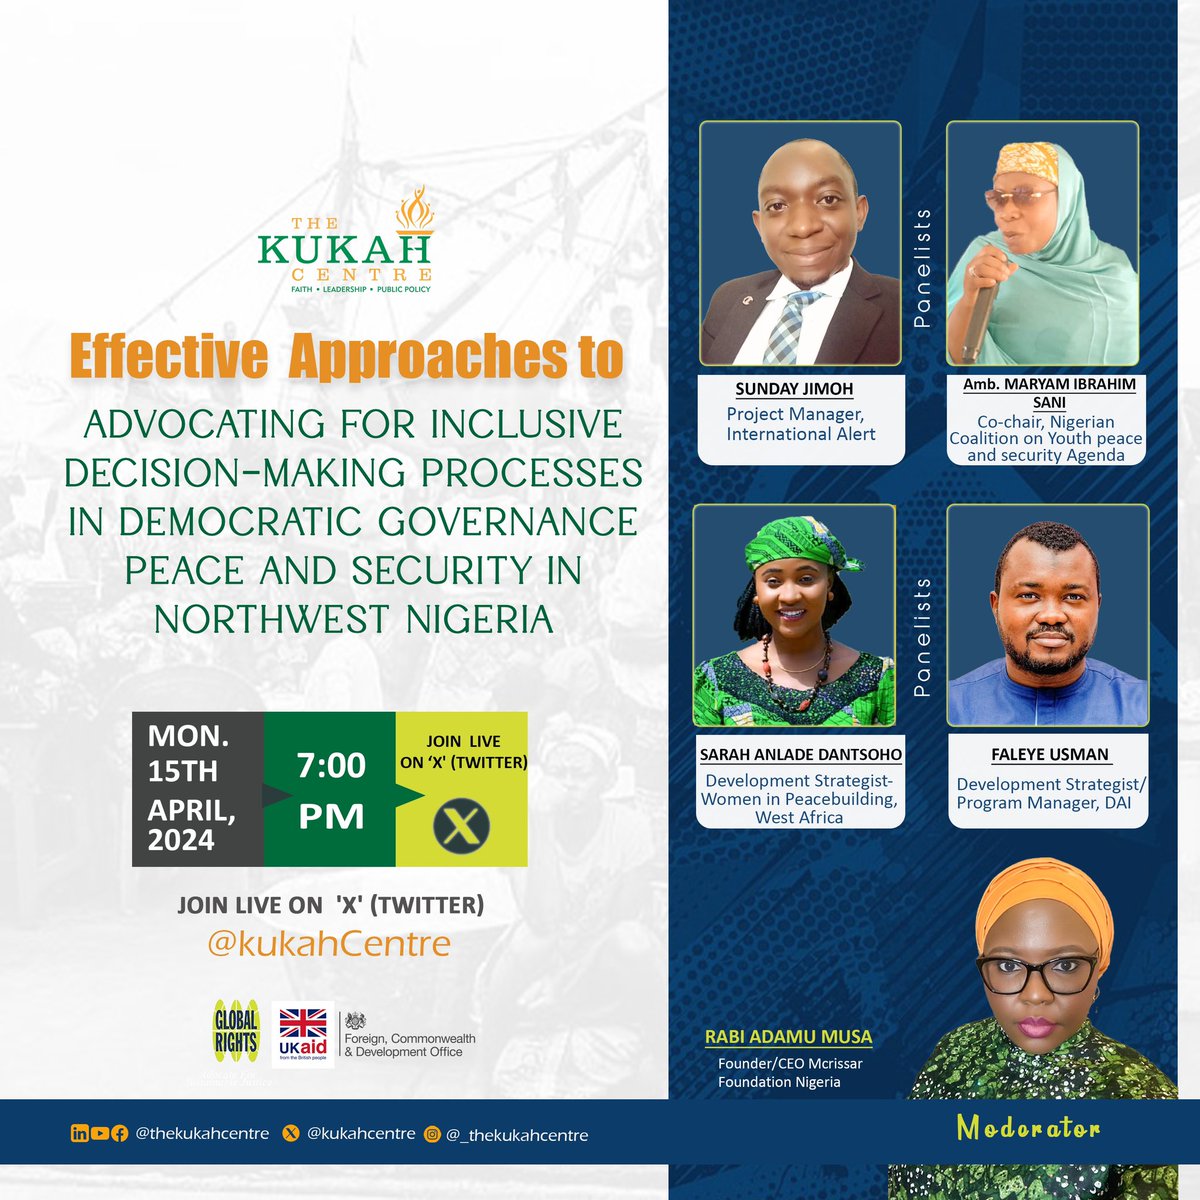 How would you approach advocacy for inclusive decision-making processes in democratic governance, peace and security, in northwest Nigeria? Join us on Monday, April 15 2024 as we discuss. Brought to you by @KukahCentre in partnership with @Globarightsng Supported by…